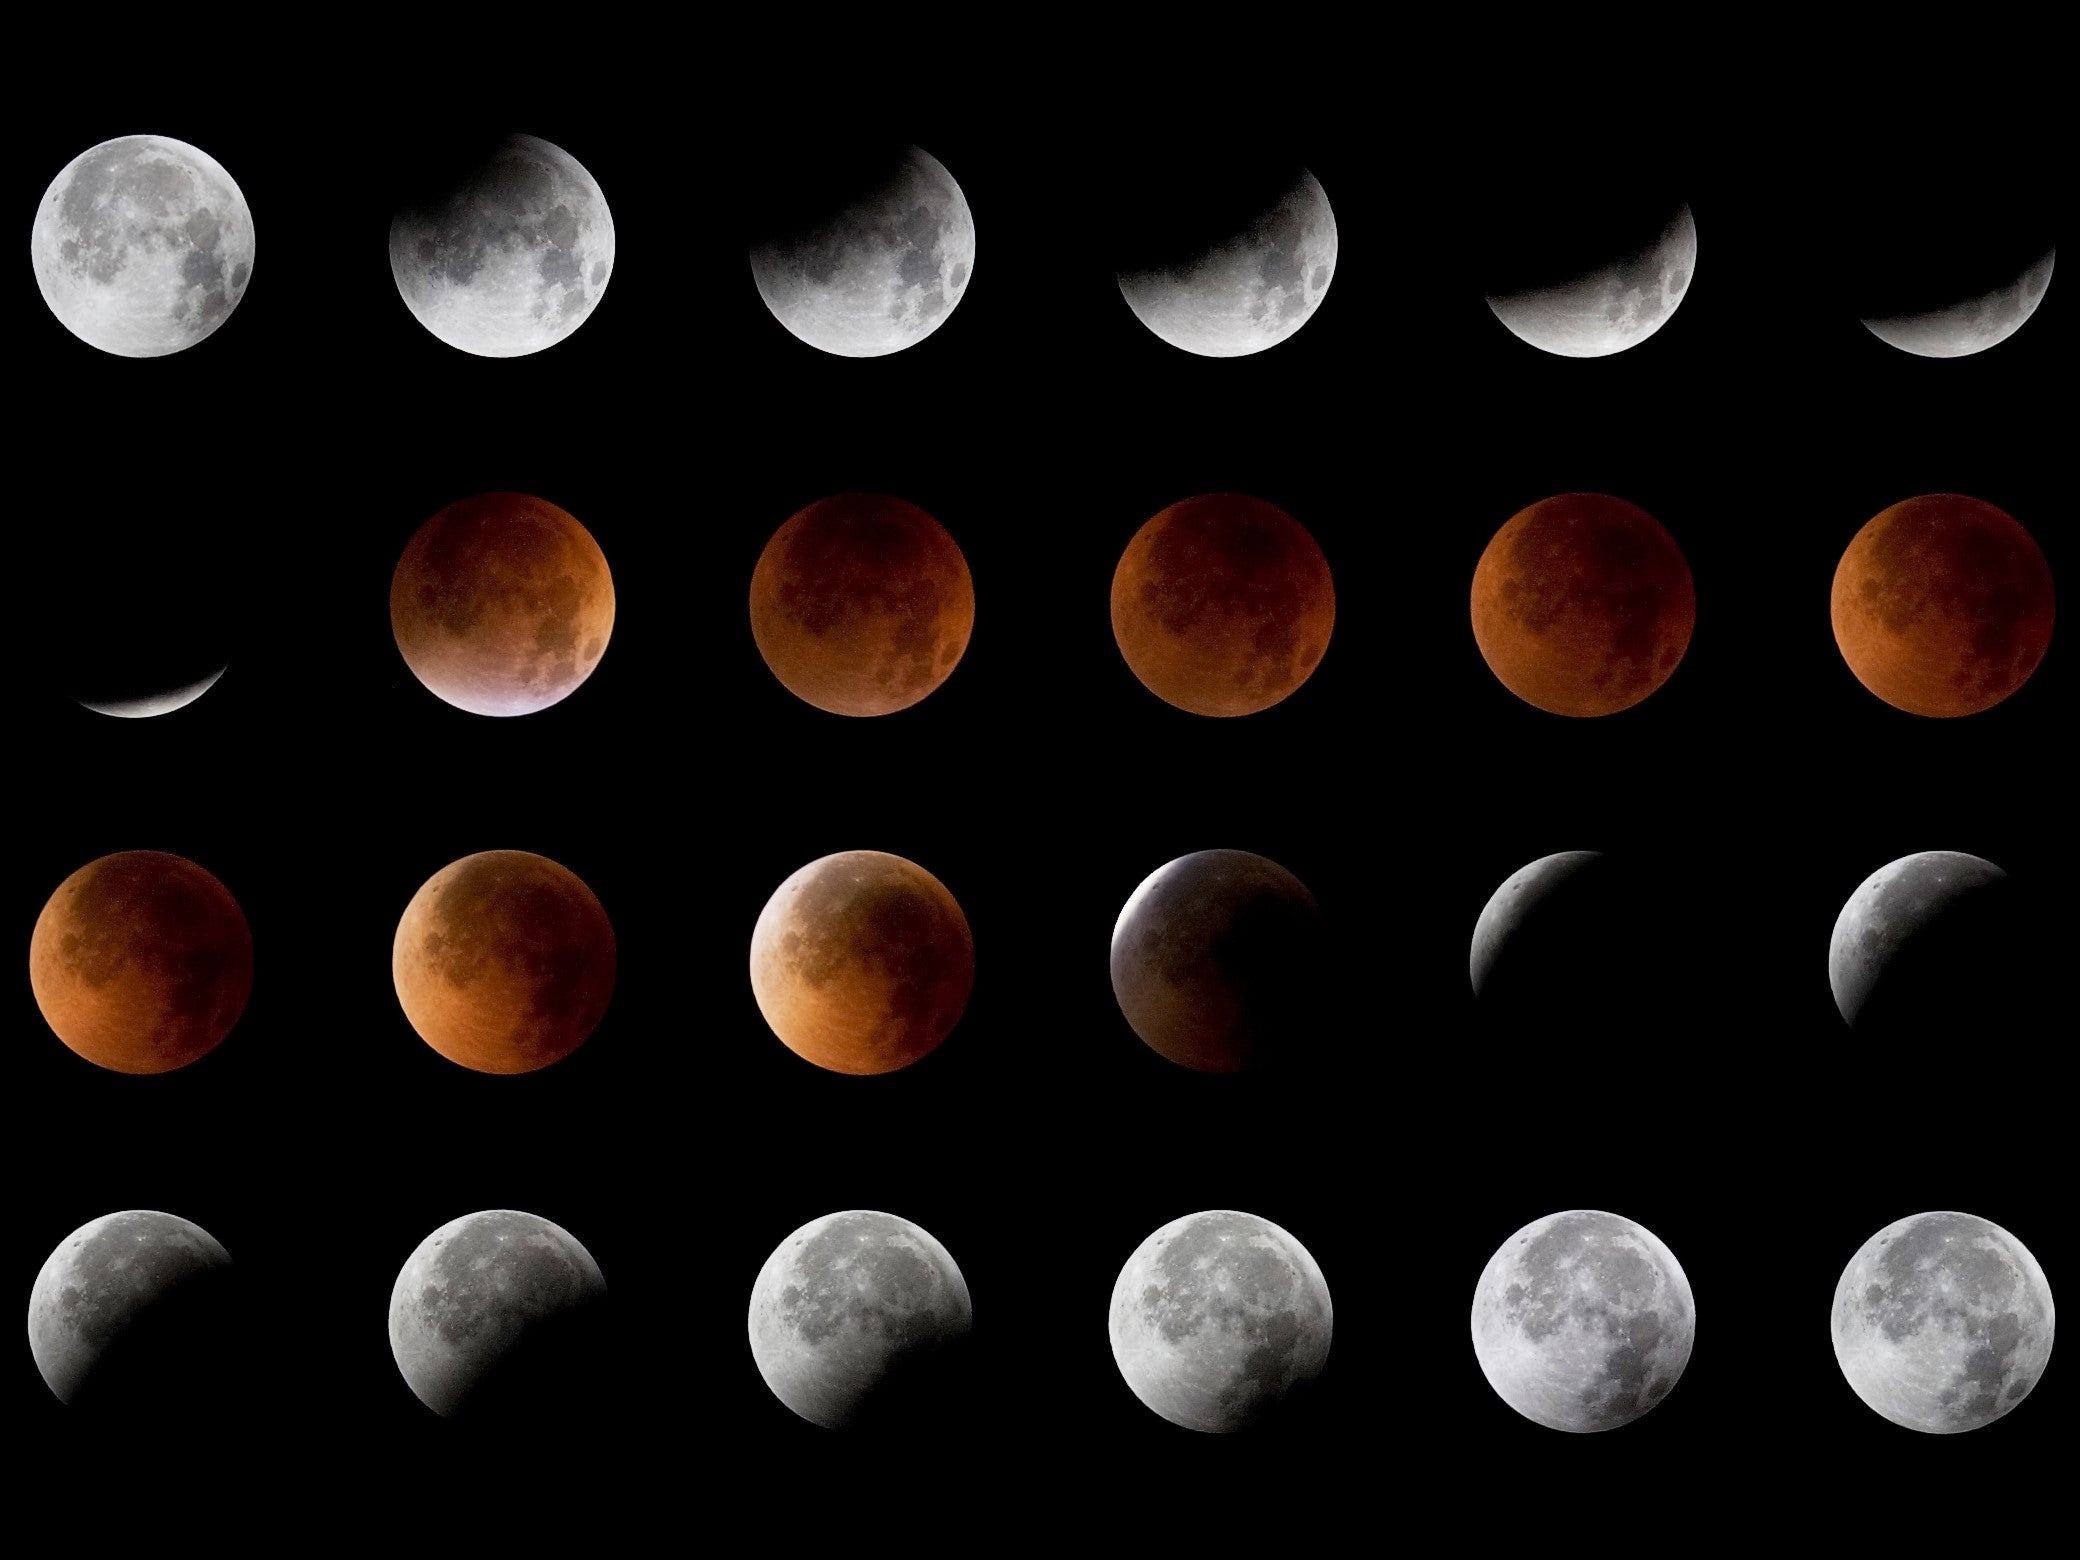 A lunar eclipse on 5 May will see the Moon darken as it moves into Earth’s shadow